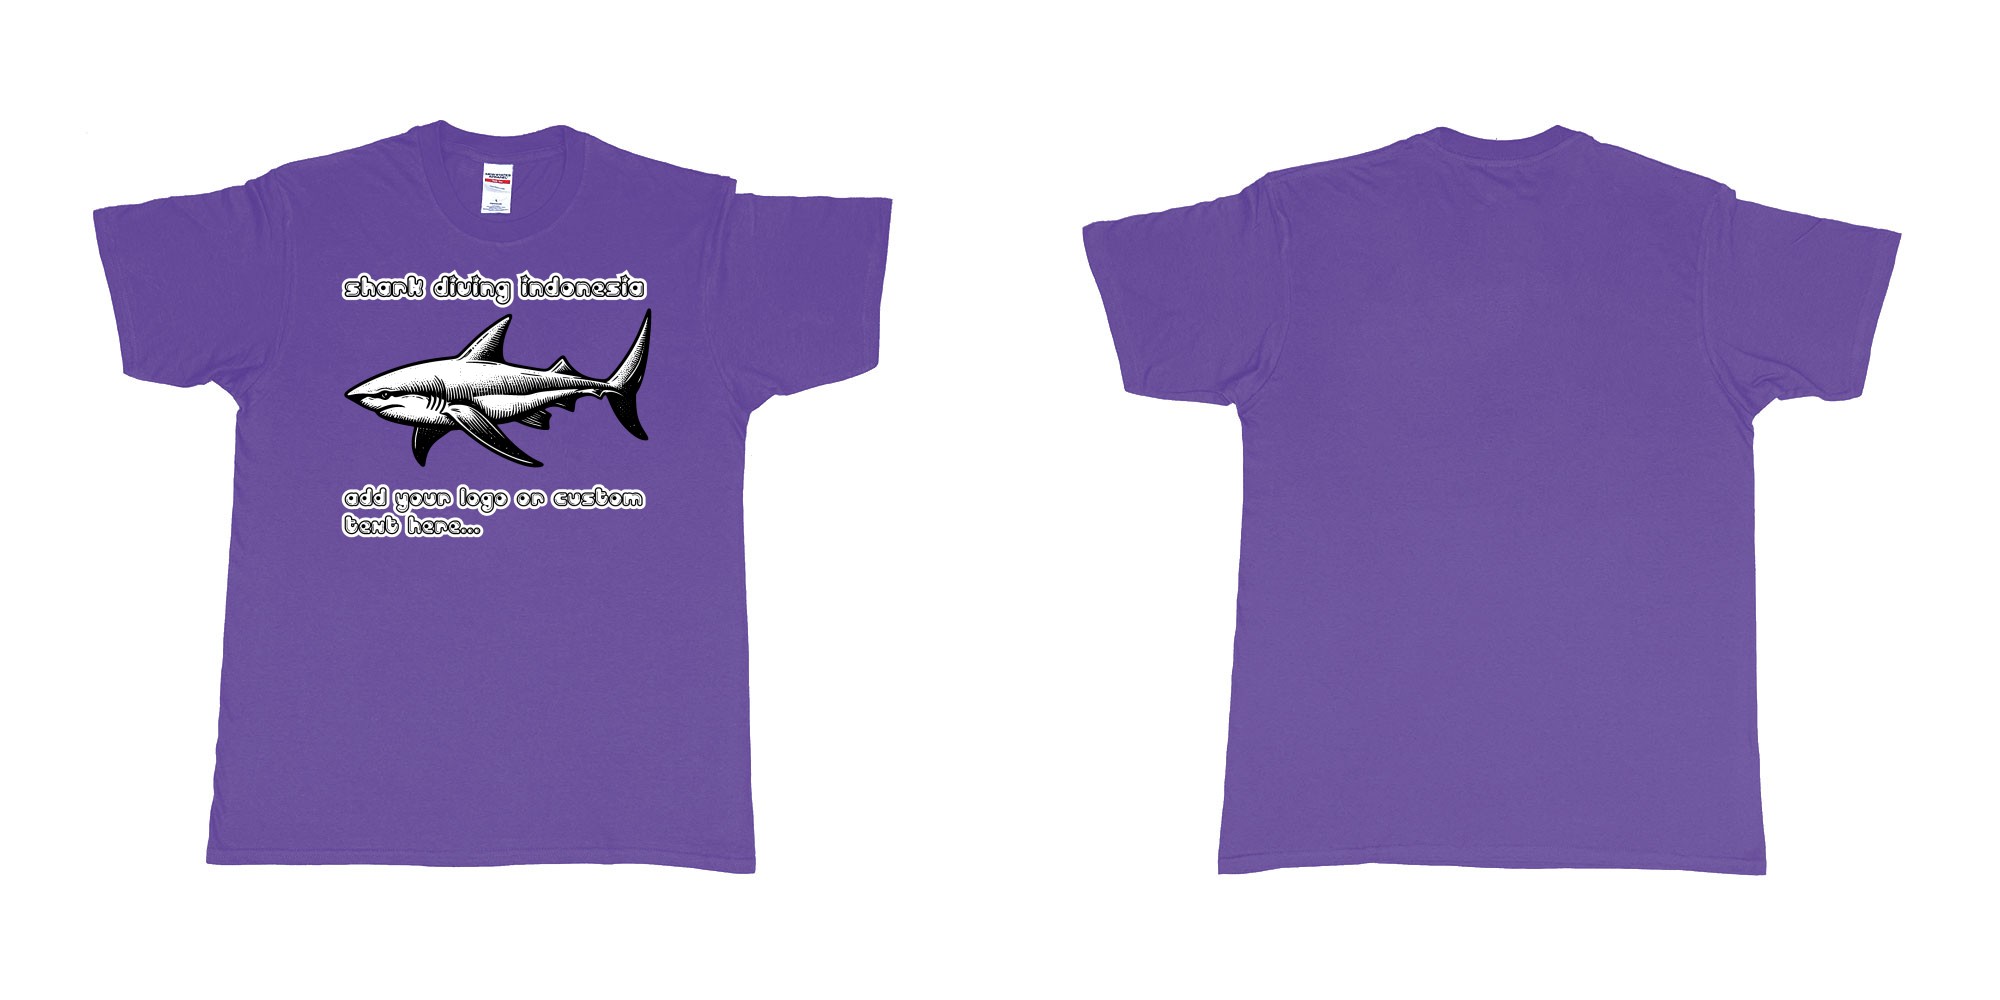 Custom tshirt design shark diving indonesia add own logo text tshirt print in fabric color purple choice your own text made in Bali by The Pirate Way